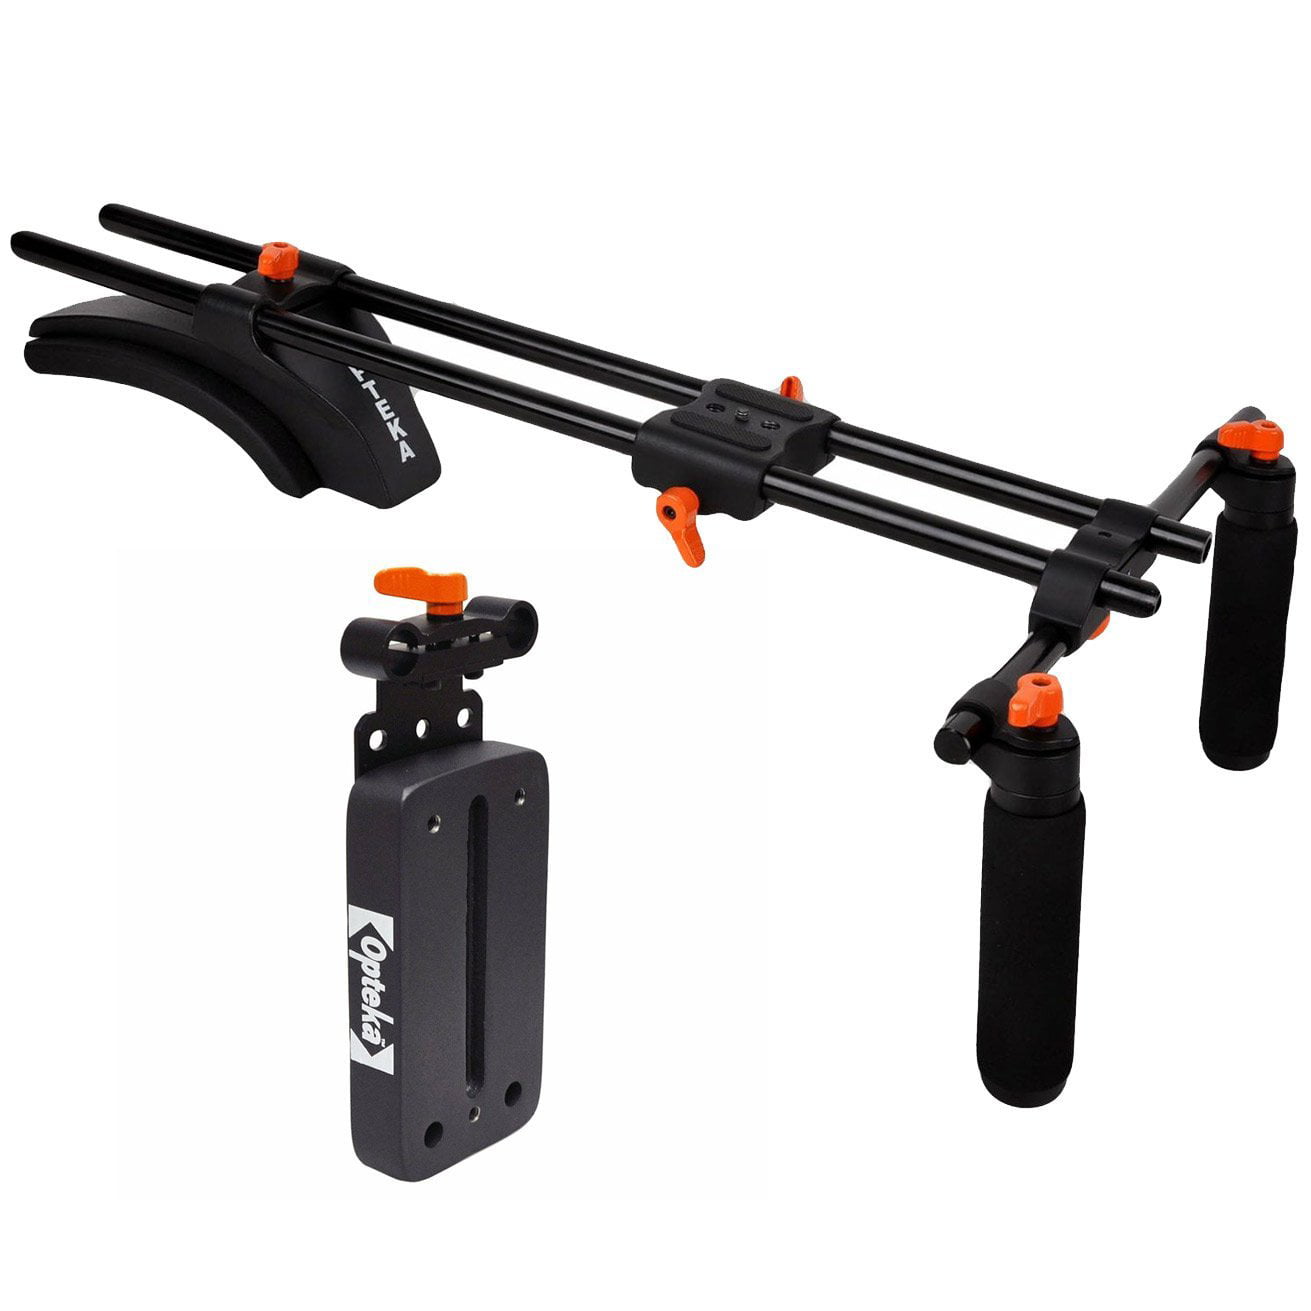 Opteka CXS-2 Dual-Grip Video Shoulder Stabilizer Support System with 15mm Accessory Rods for Digital SLR Cameras